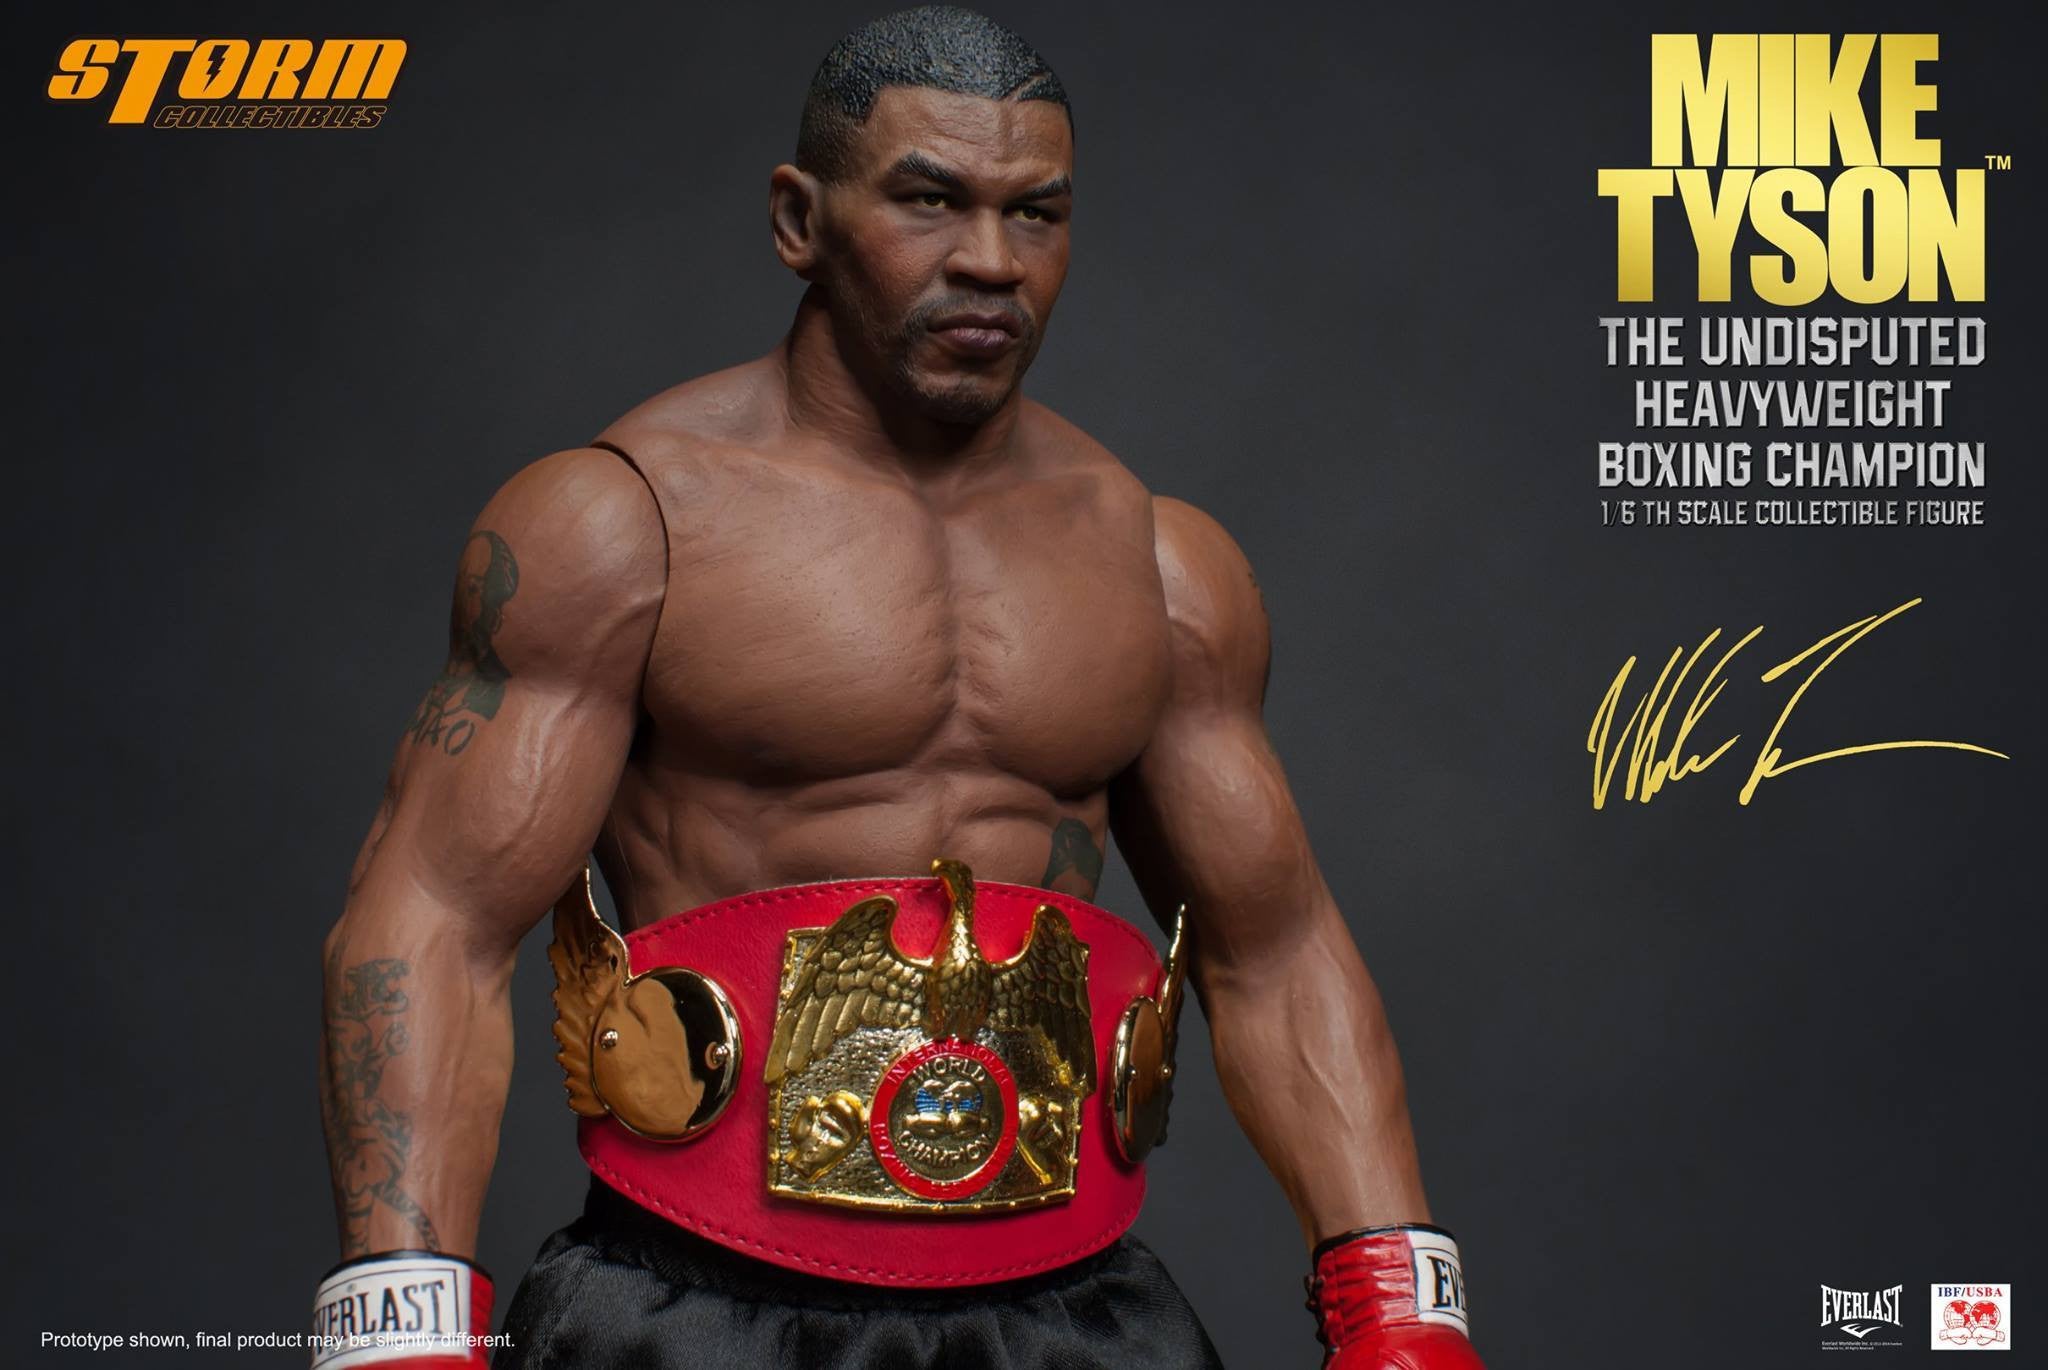 Storm Collectibles - 1:6 Scale Collectible Figure - Mike Tyson "The Undisputed Heavyweight Boxing Champion" - Marvelous Toys - 17